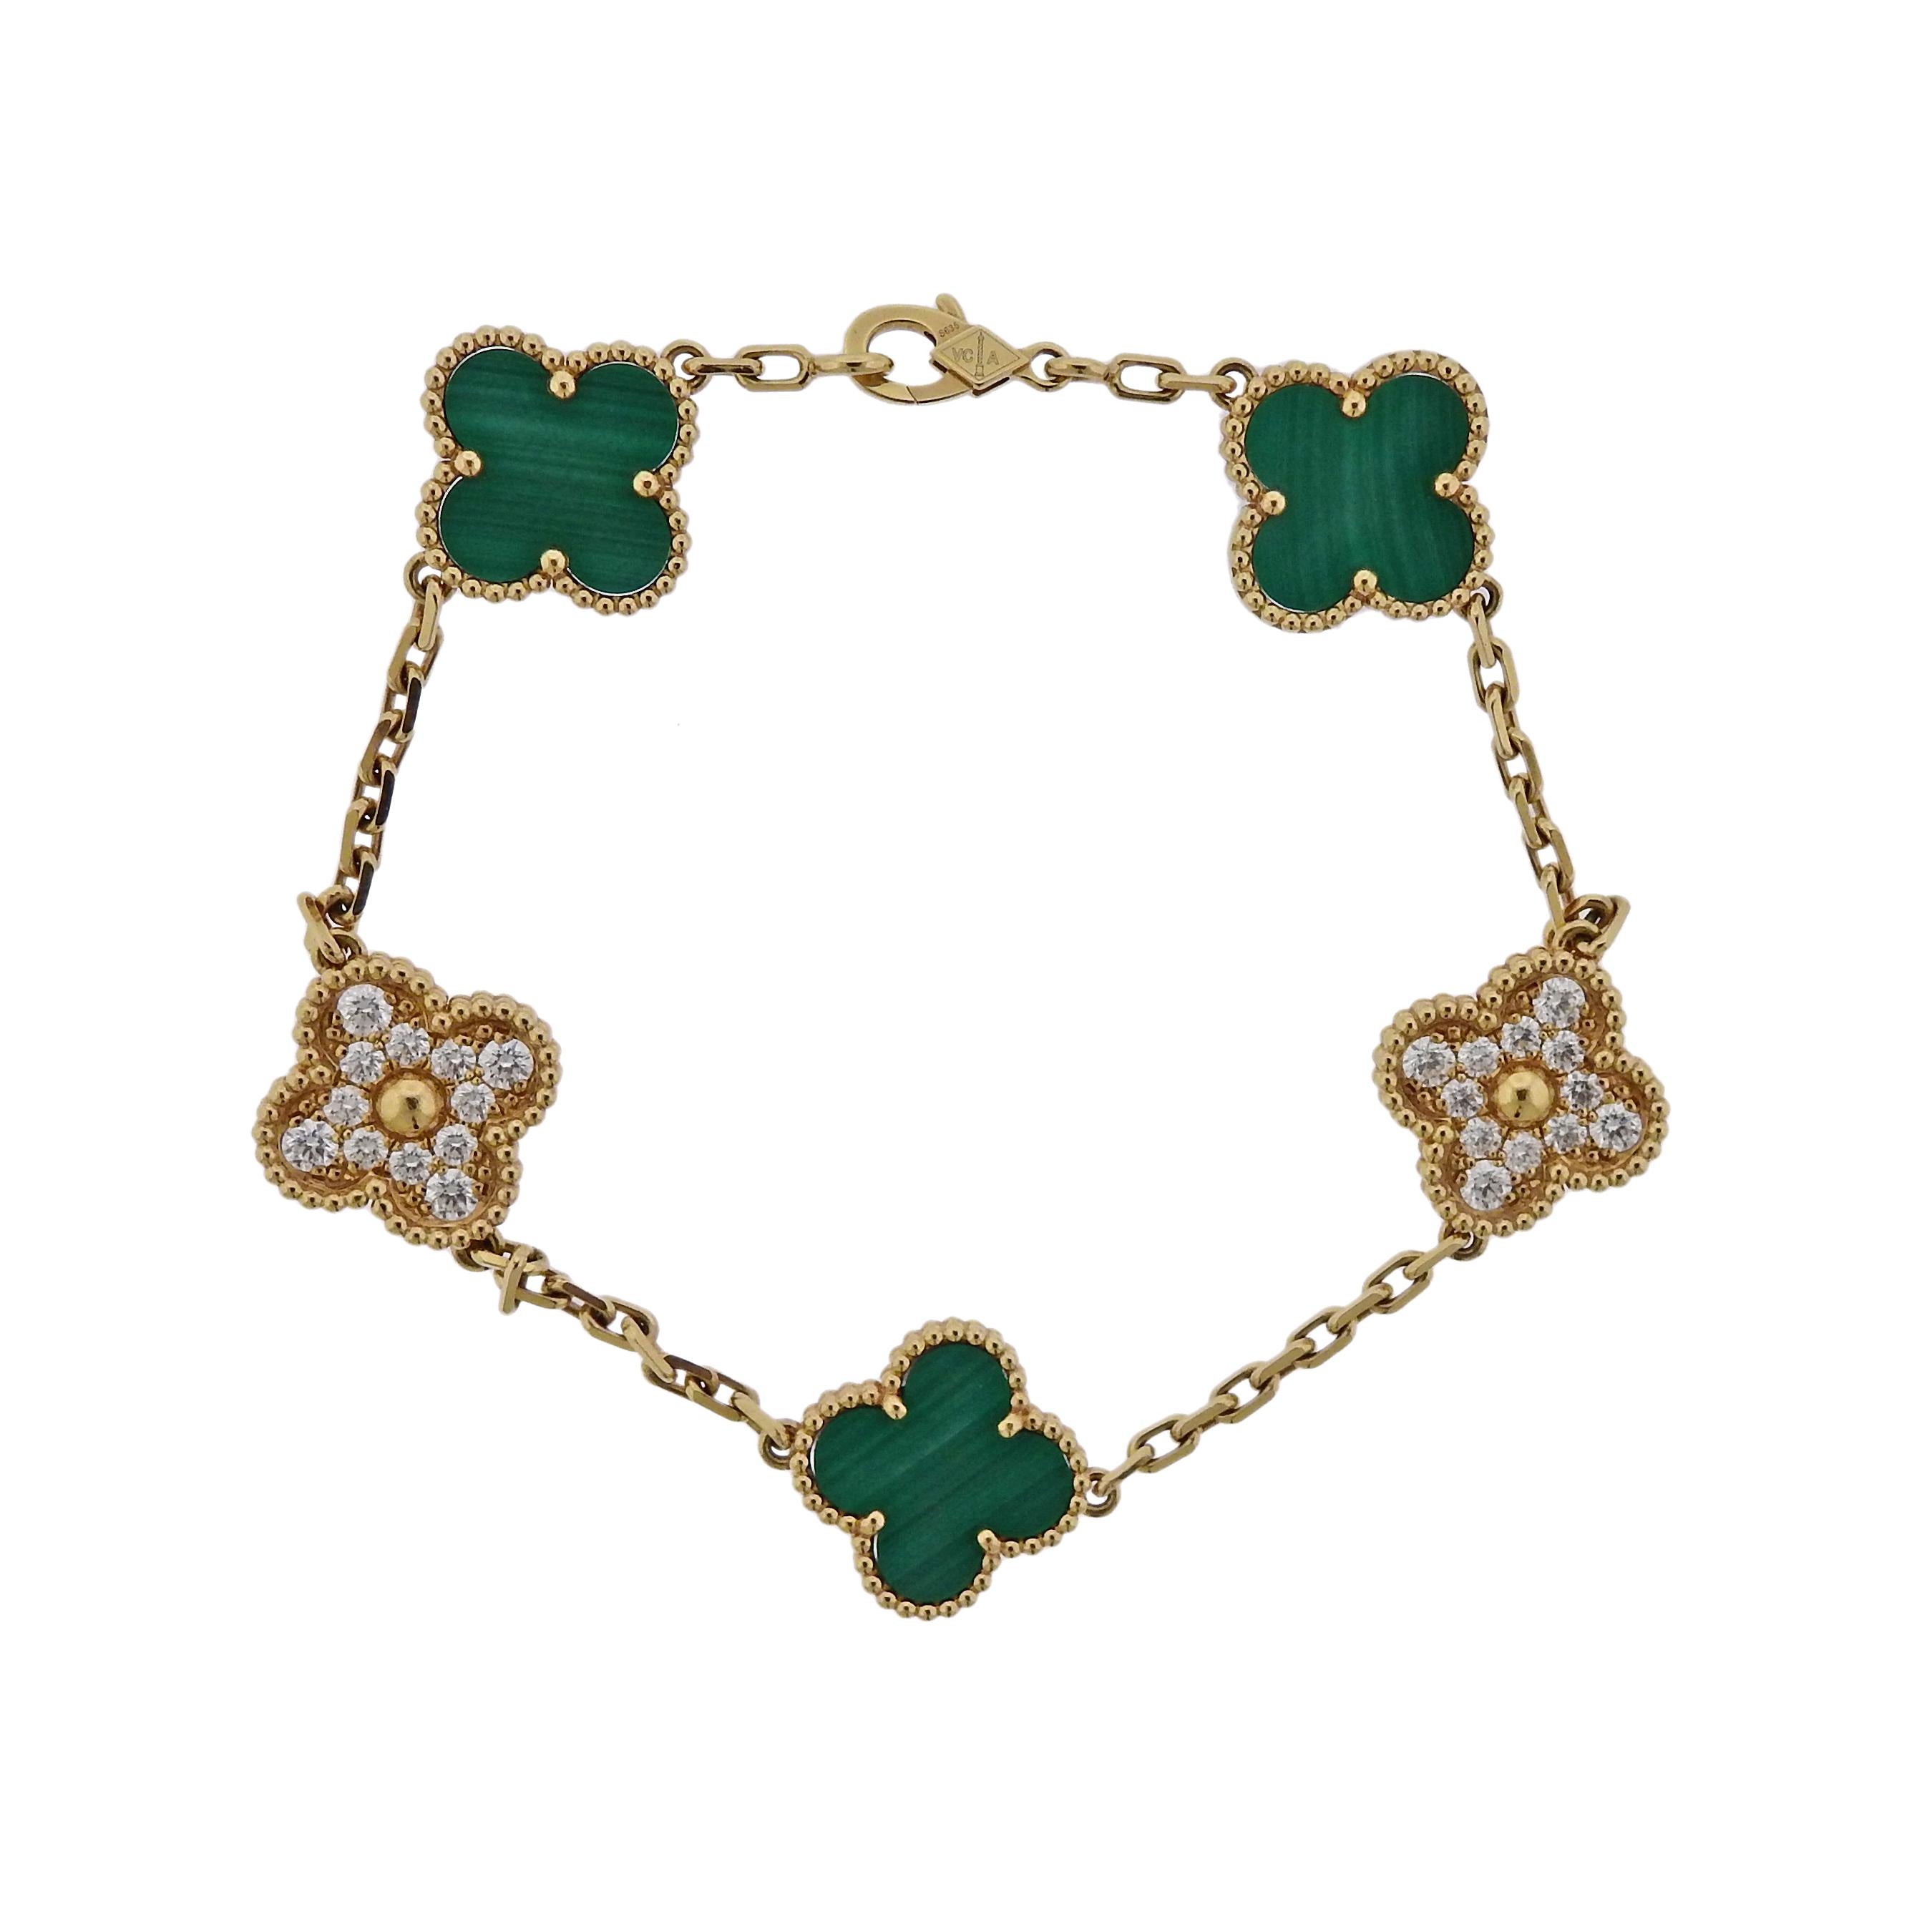 Iconic Vintage Alhambra 18k gold bracelet by Van Cleef & Arpels, set with malachite and diamond clovers, with total of 0.96ctw in FG/VVS. Retail $12400. Comes with box. Bracelet is 7.5